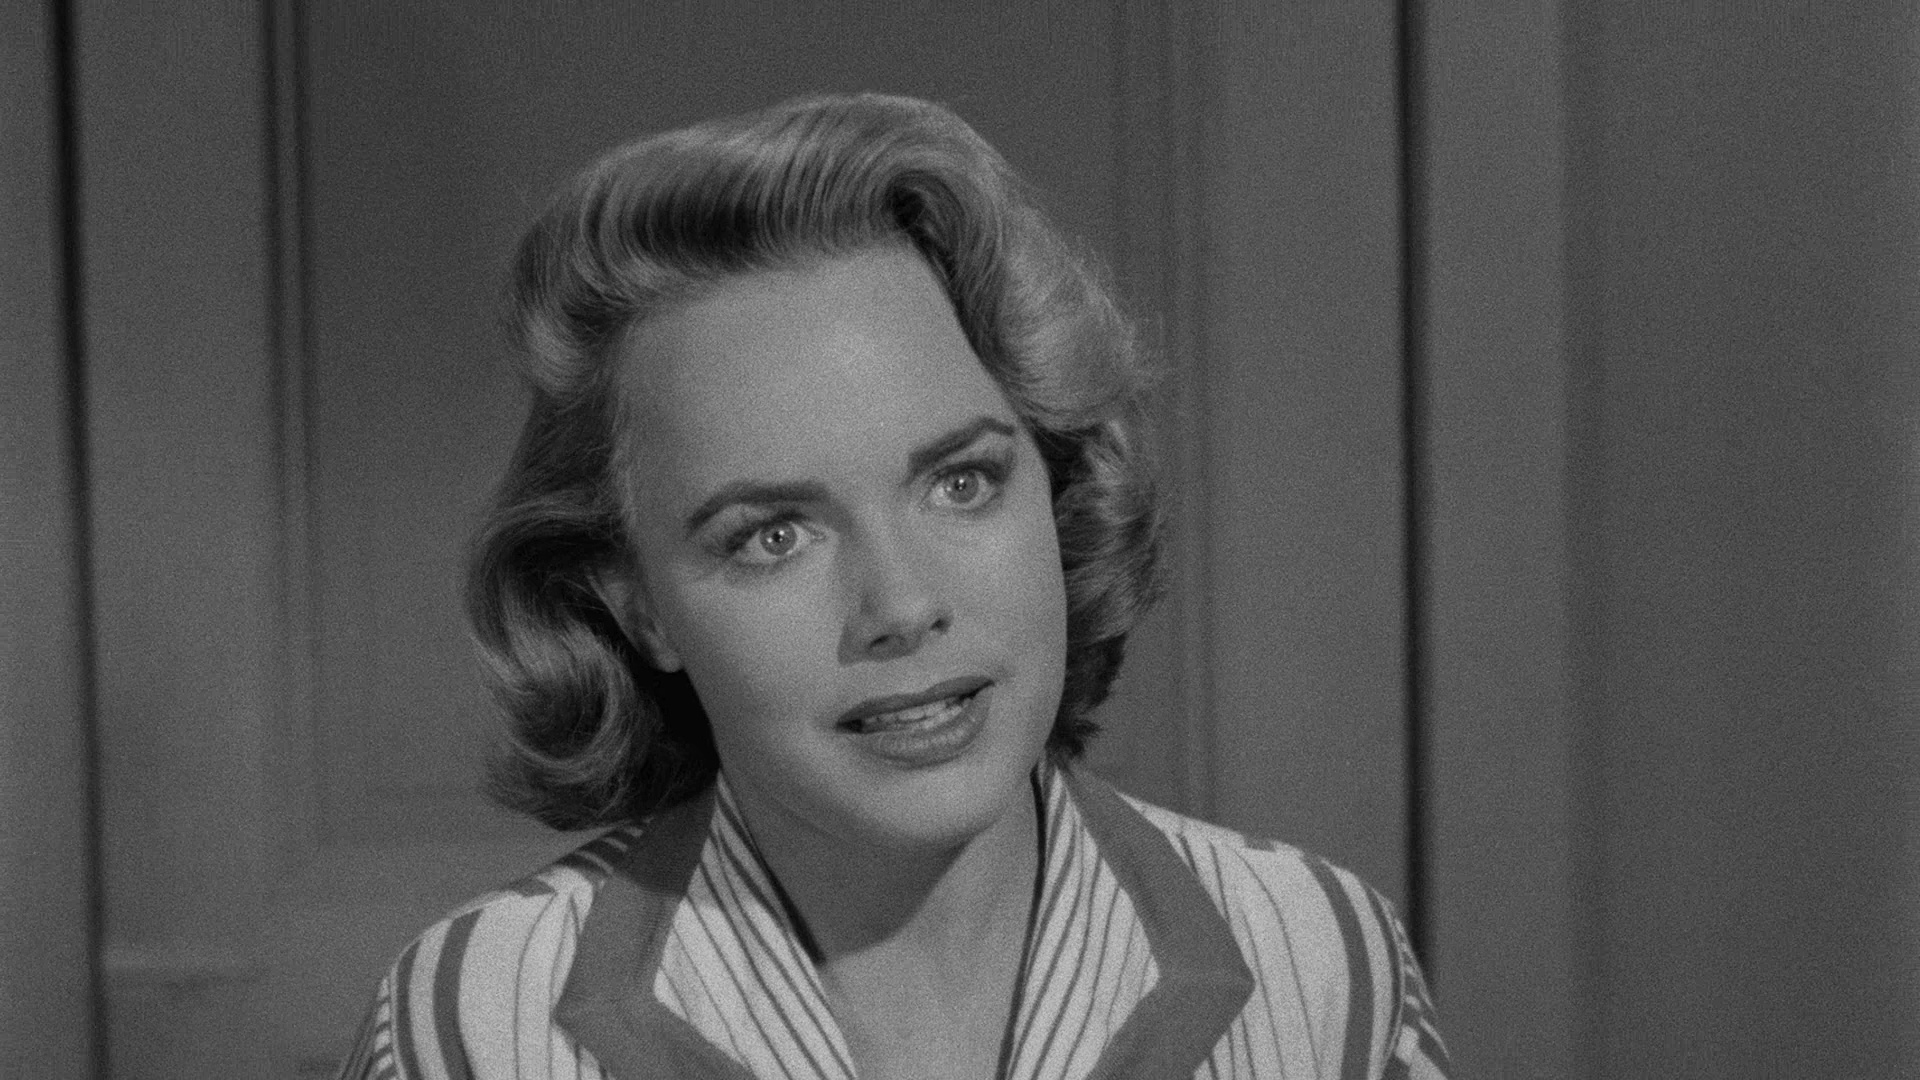 Shack Out on 101 (1955) Screenshot 3 